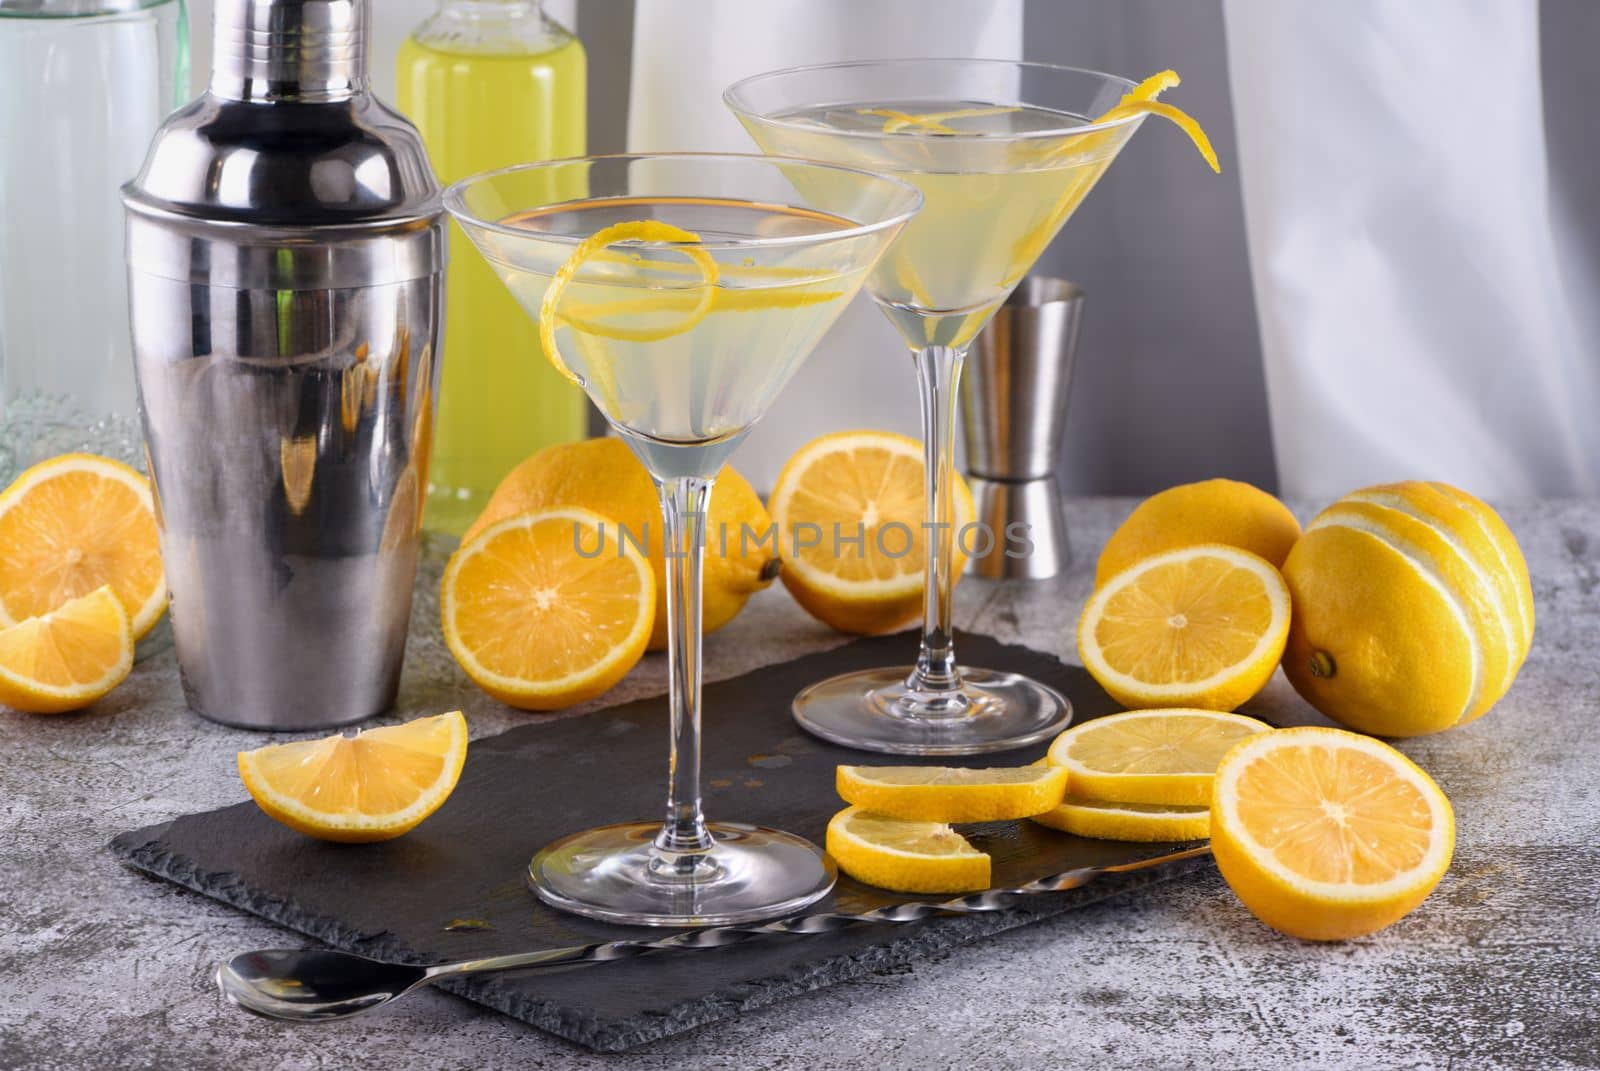 Lemon drop martini with zest by Apolonia